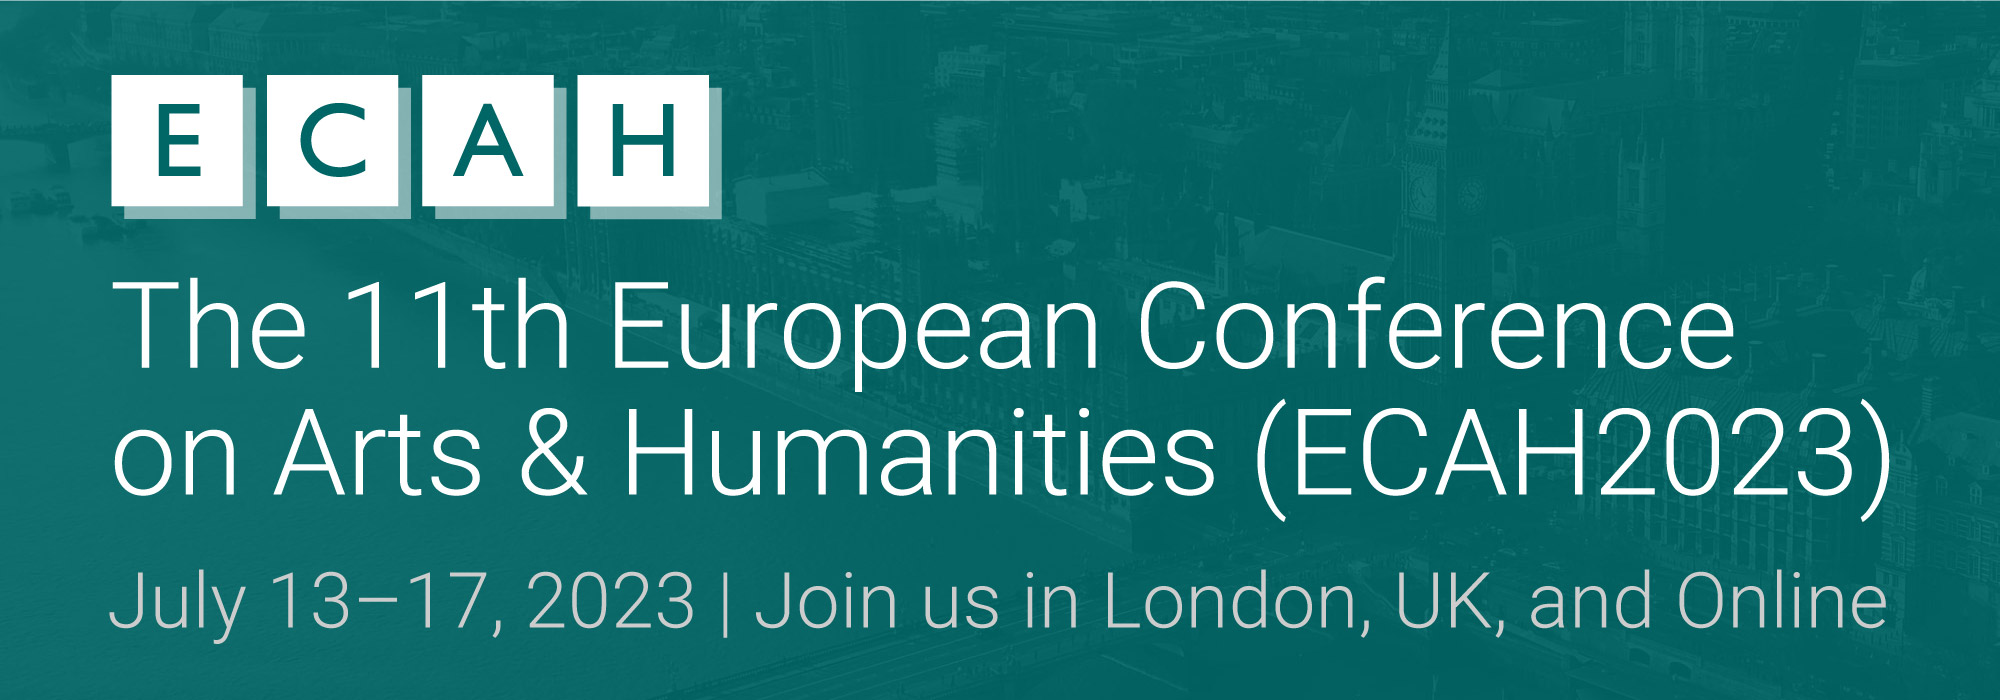 The 11th European Conference on Arts & Humanities ECAH2023 Logo